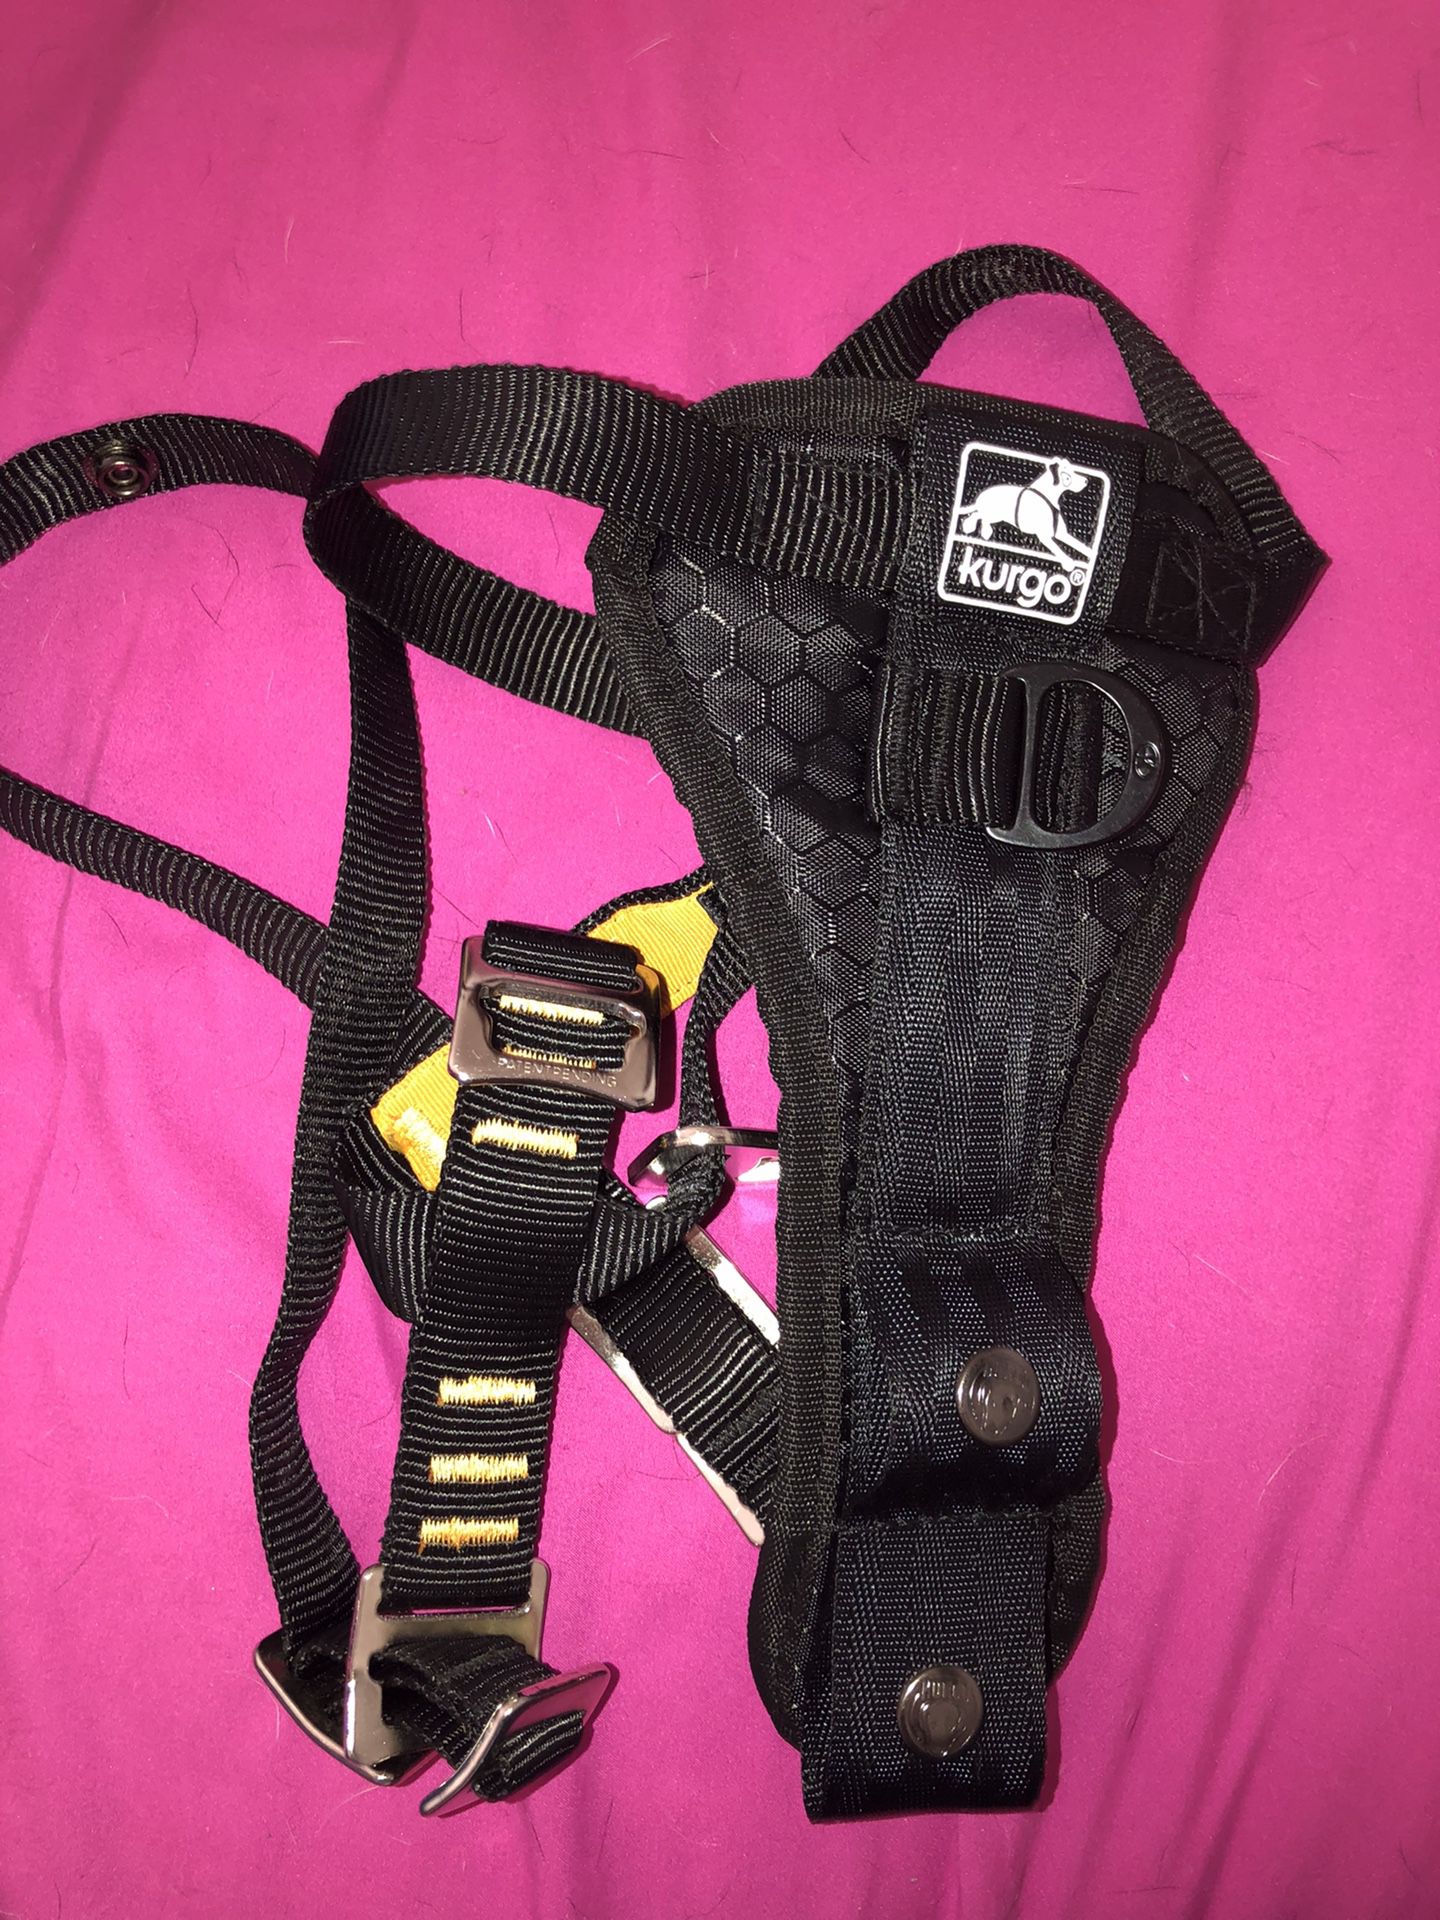 New Vehicle Seatbelt Harness  Size Med 